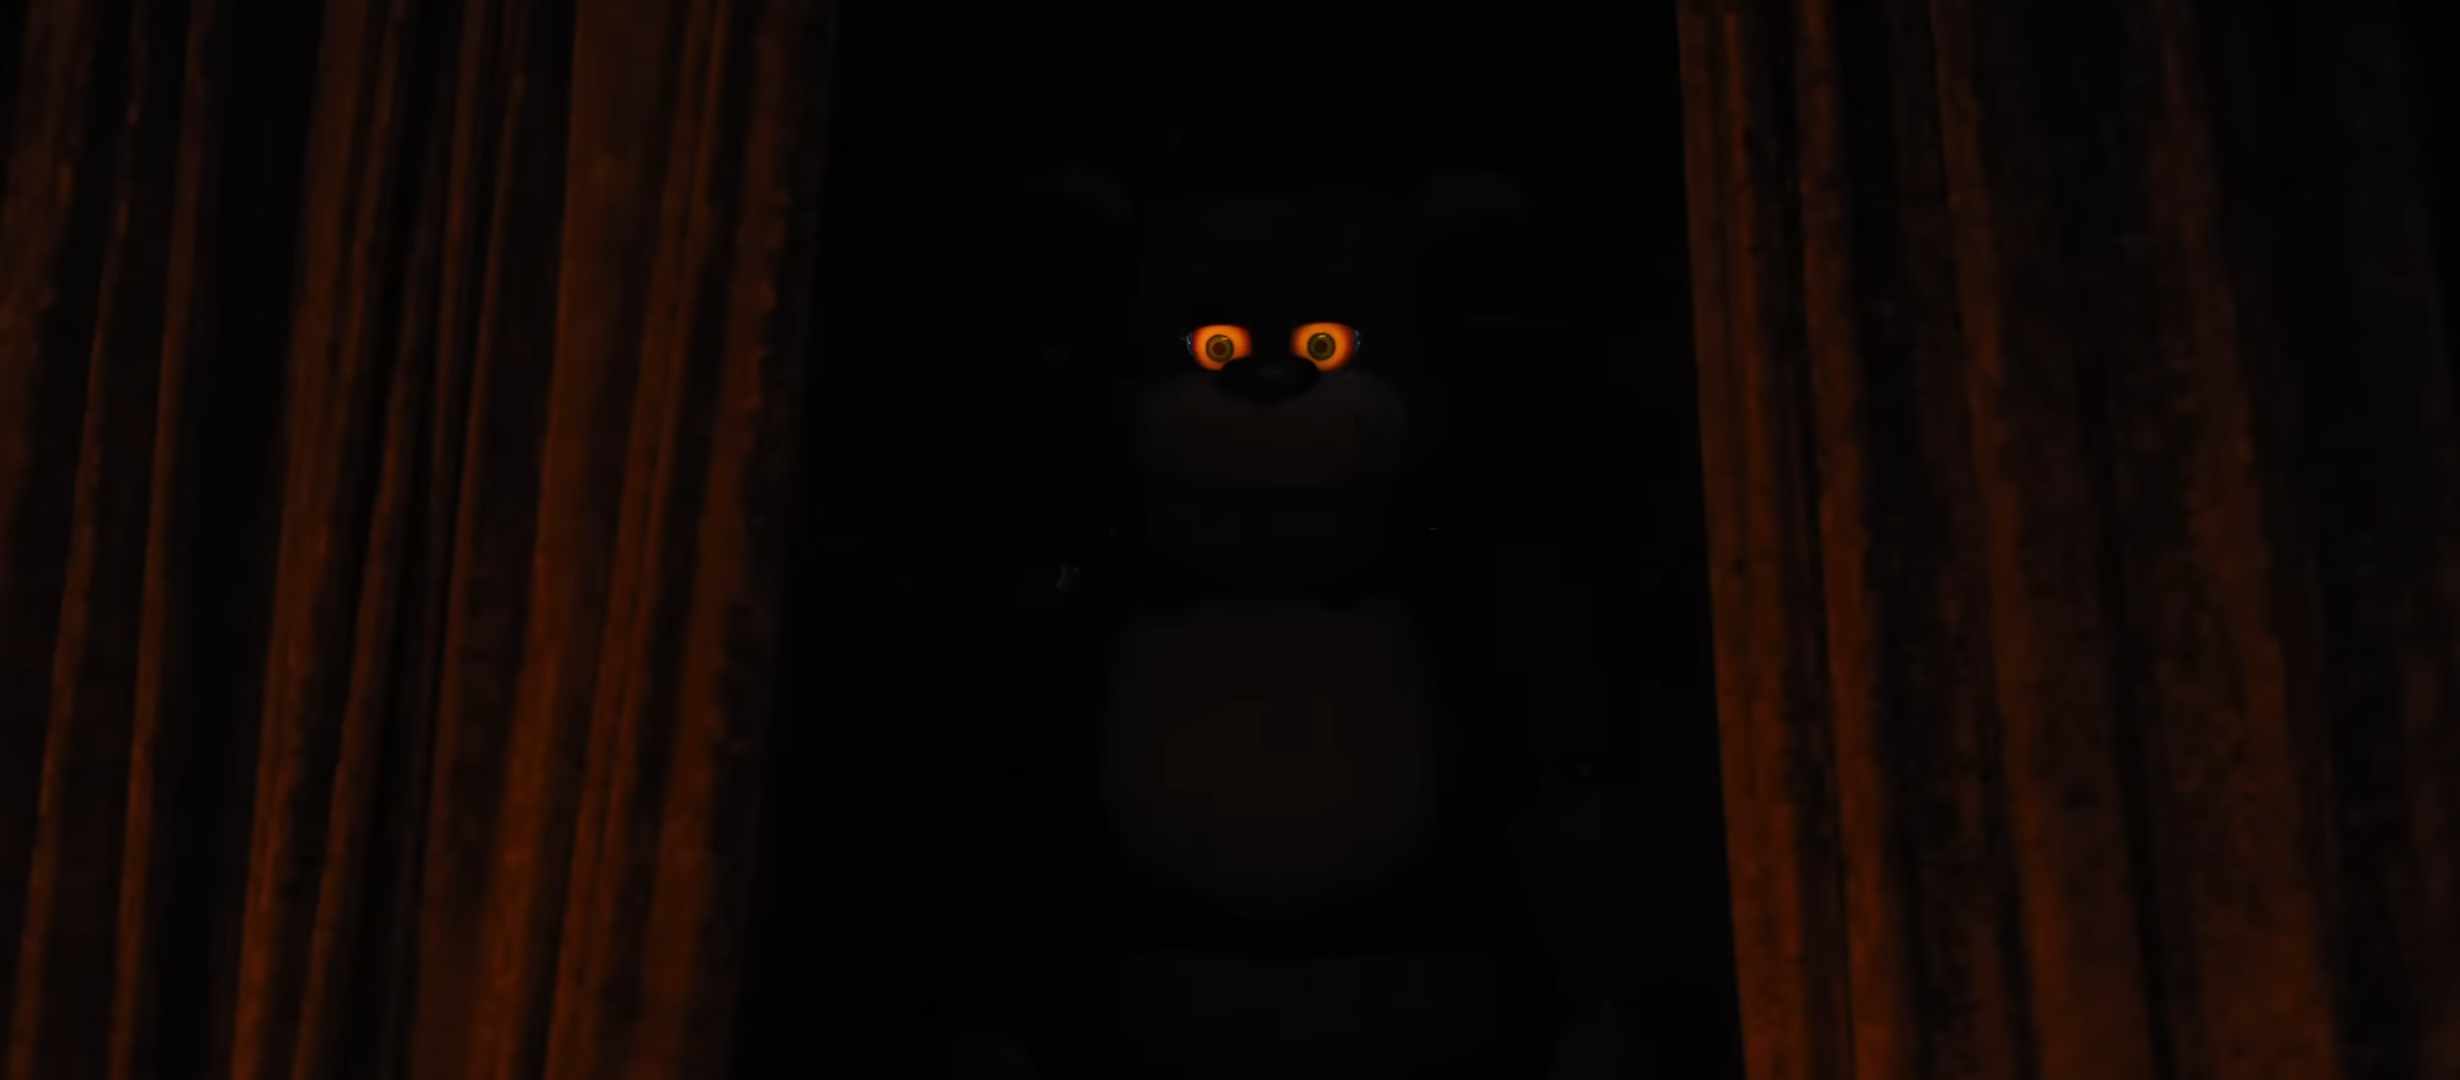 Five Nights at Freddy's trailer